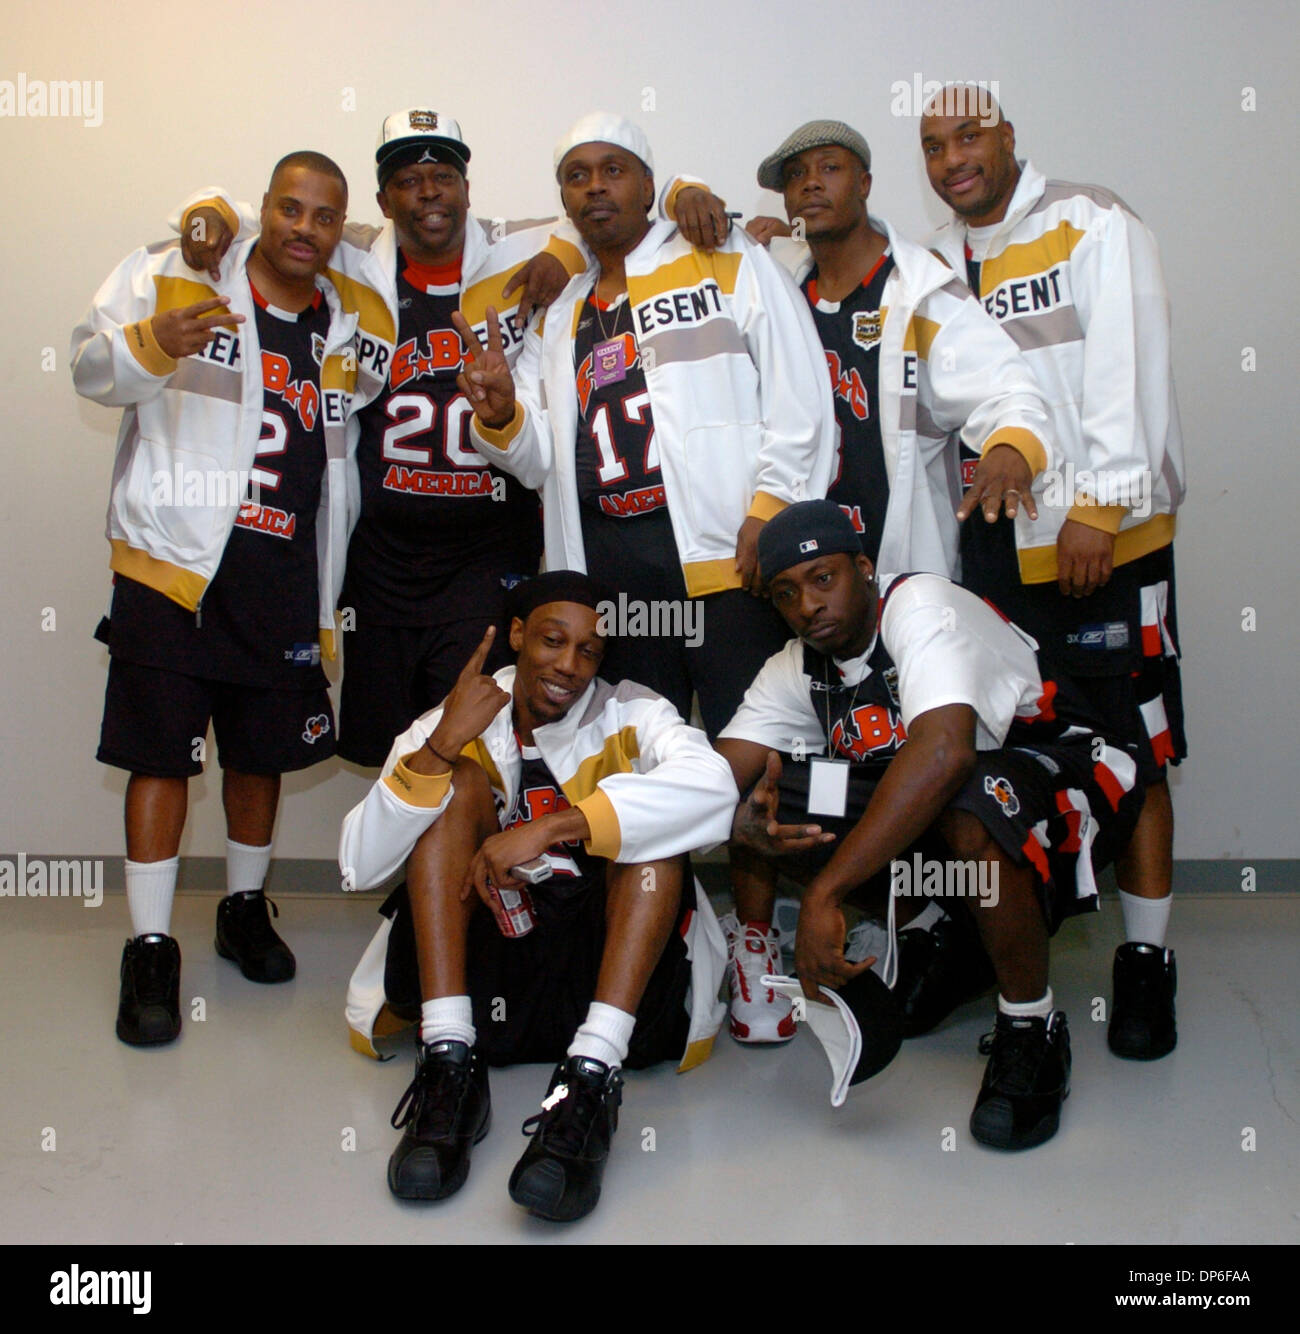 Oct 15, 2006; Brooklyn, NY, USA; Team of 'Old School' hip hop stars. VH1 and the City of New York present 'VH1 Hip Hop Honors Celebrity Hoops' exhibition basketball game at Long Island University's Brooklyn Campus.  Mandatory Credit: Photo by Bryan Smith/ZUMA Press. (©) Copyright 2006 by Bryan Smith Stock Photo